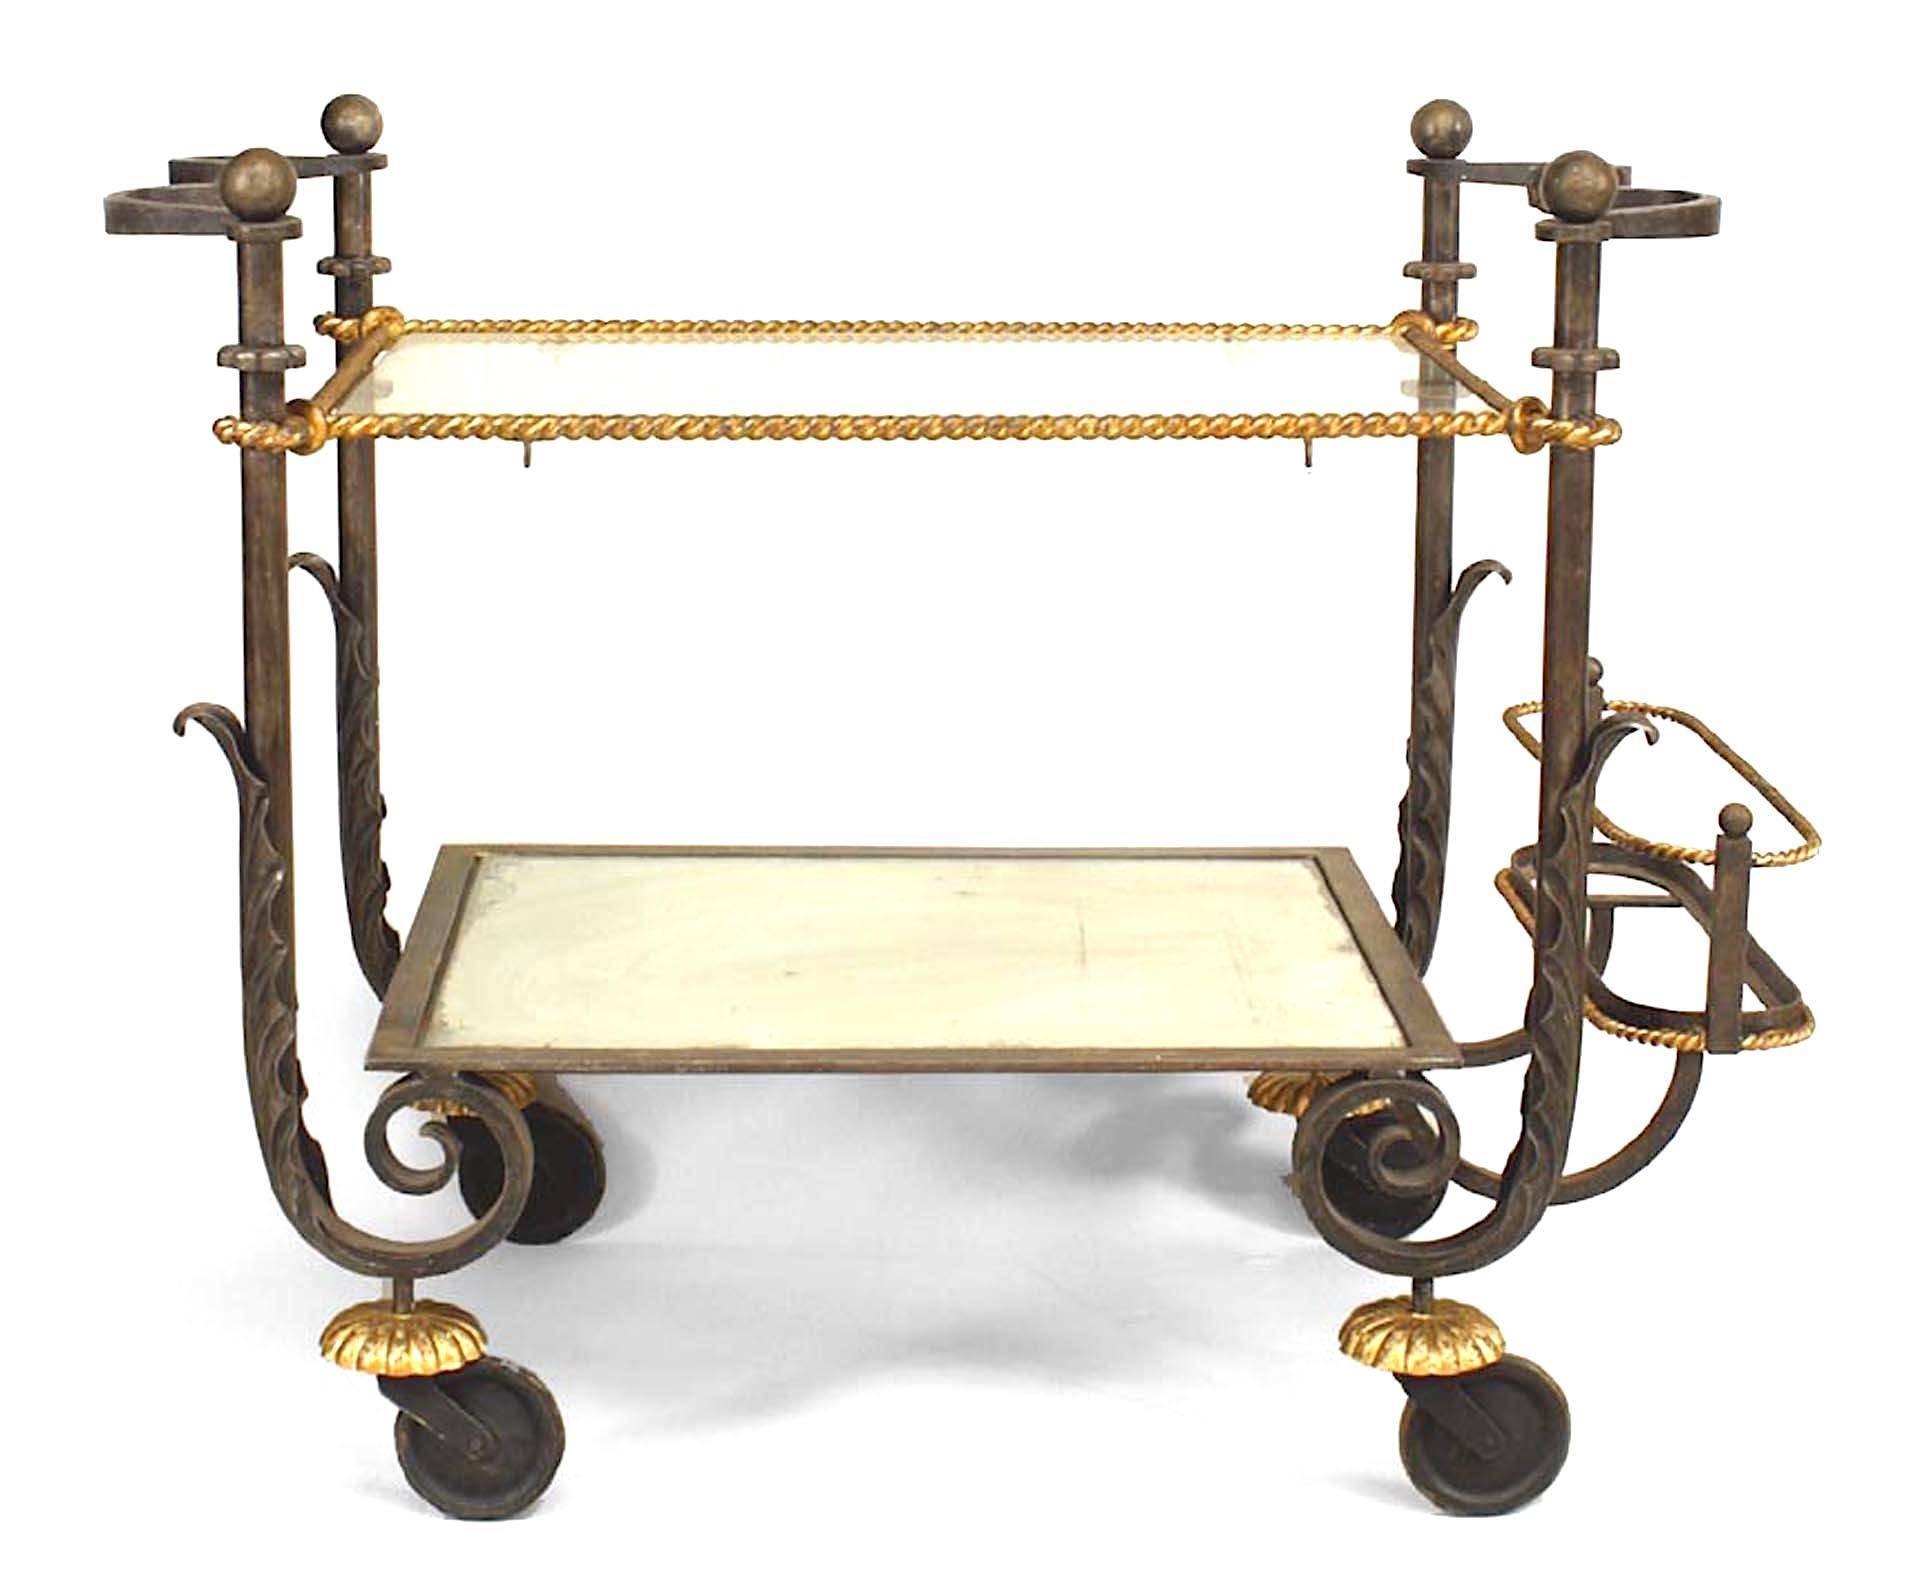 1940's two tier tea cart attributed to the French designer Gilbert Poillerat. The iron and gilt rope style cart features two glass shelves, a rear bottle rack, and rests on wheels.

The French decorator and wrought iron craftsman Gilbert Poillerat